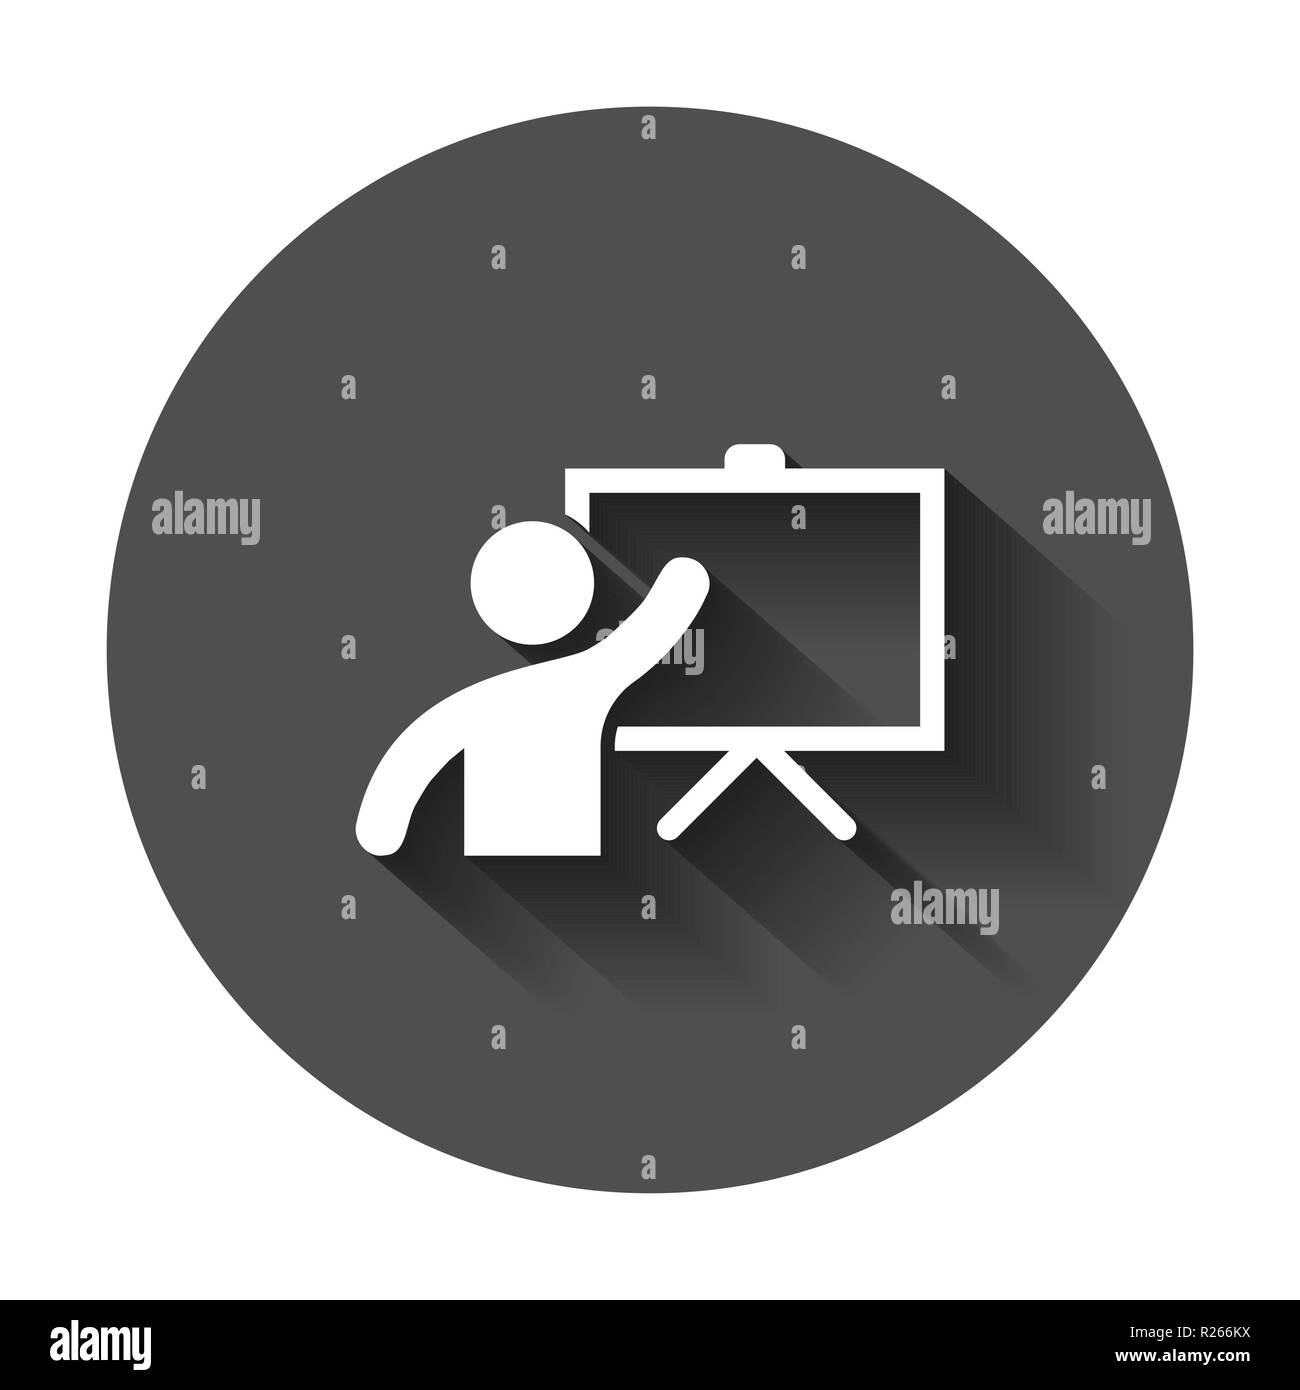 Training education icon in flat style. People seminar vector illustration with long shadow. School classroom lesson business concept. Stock Vector